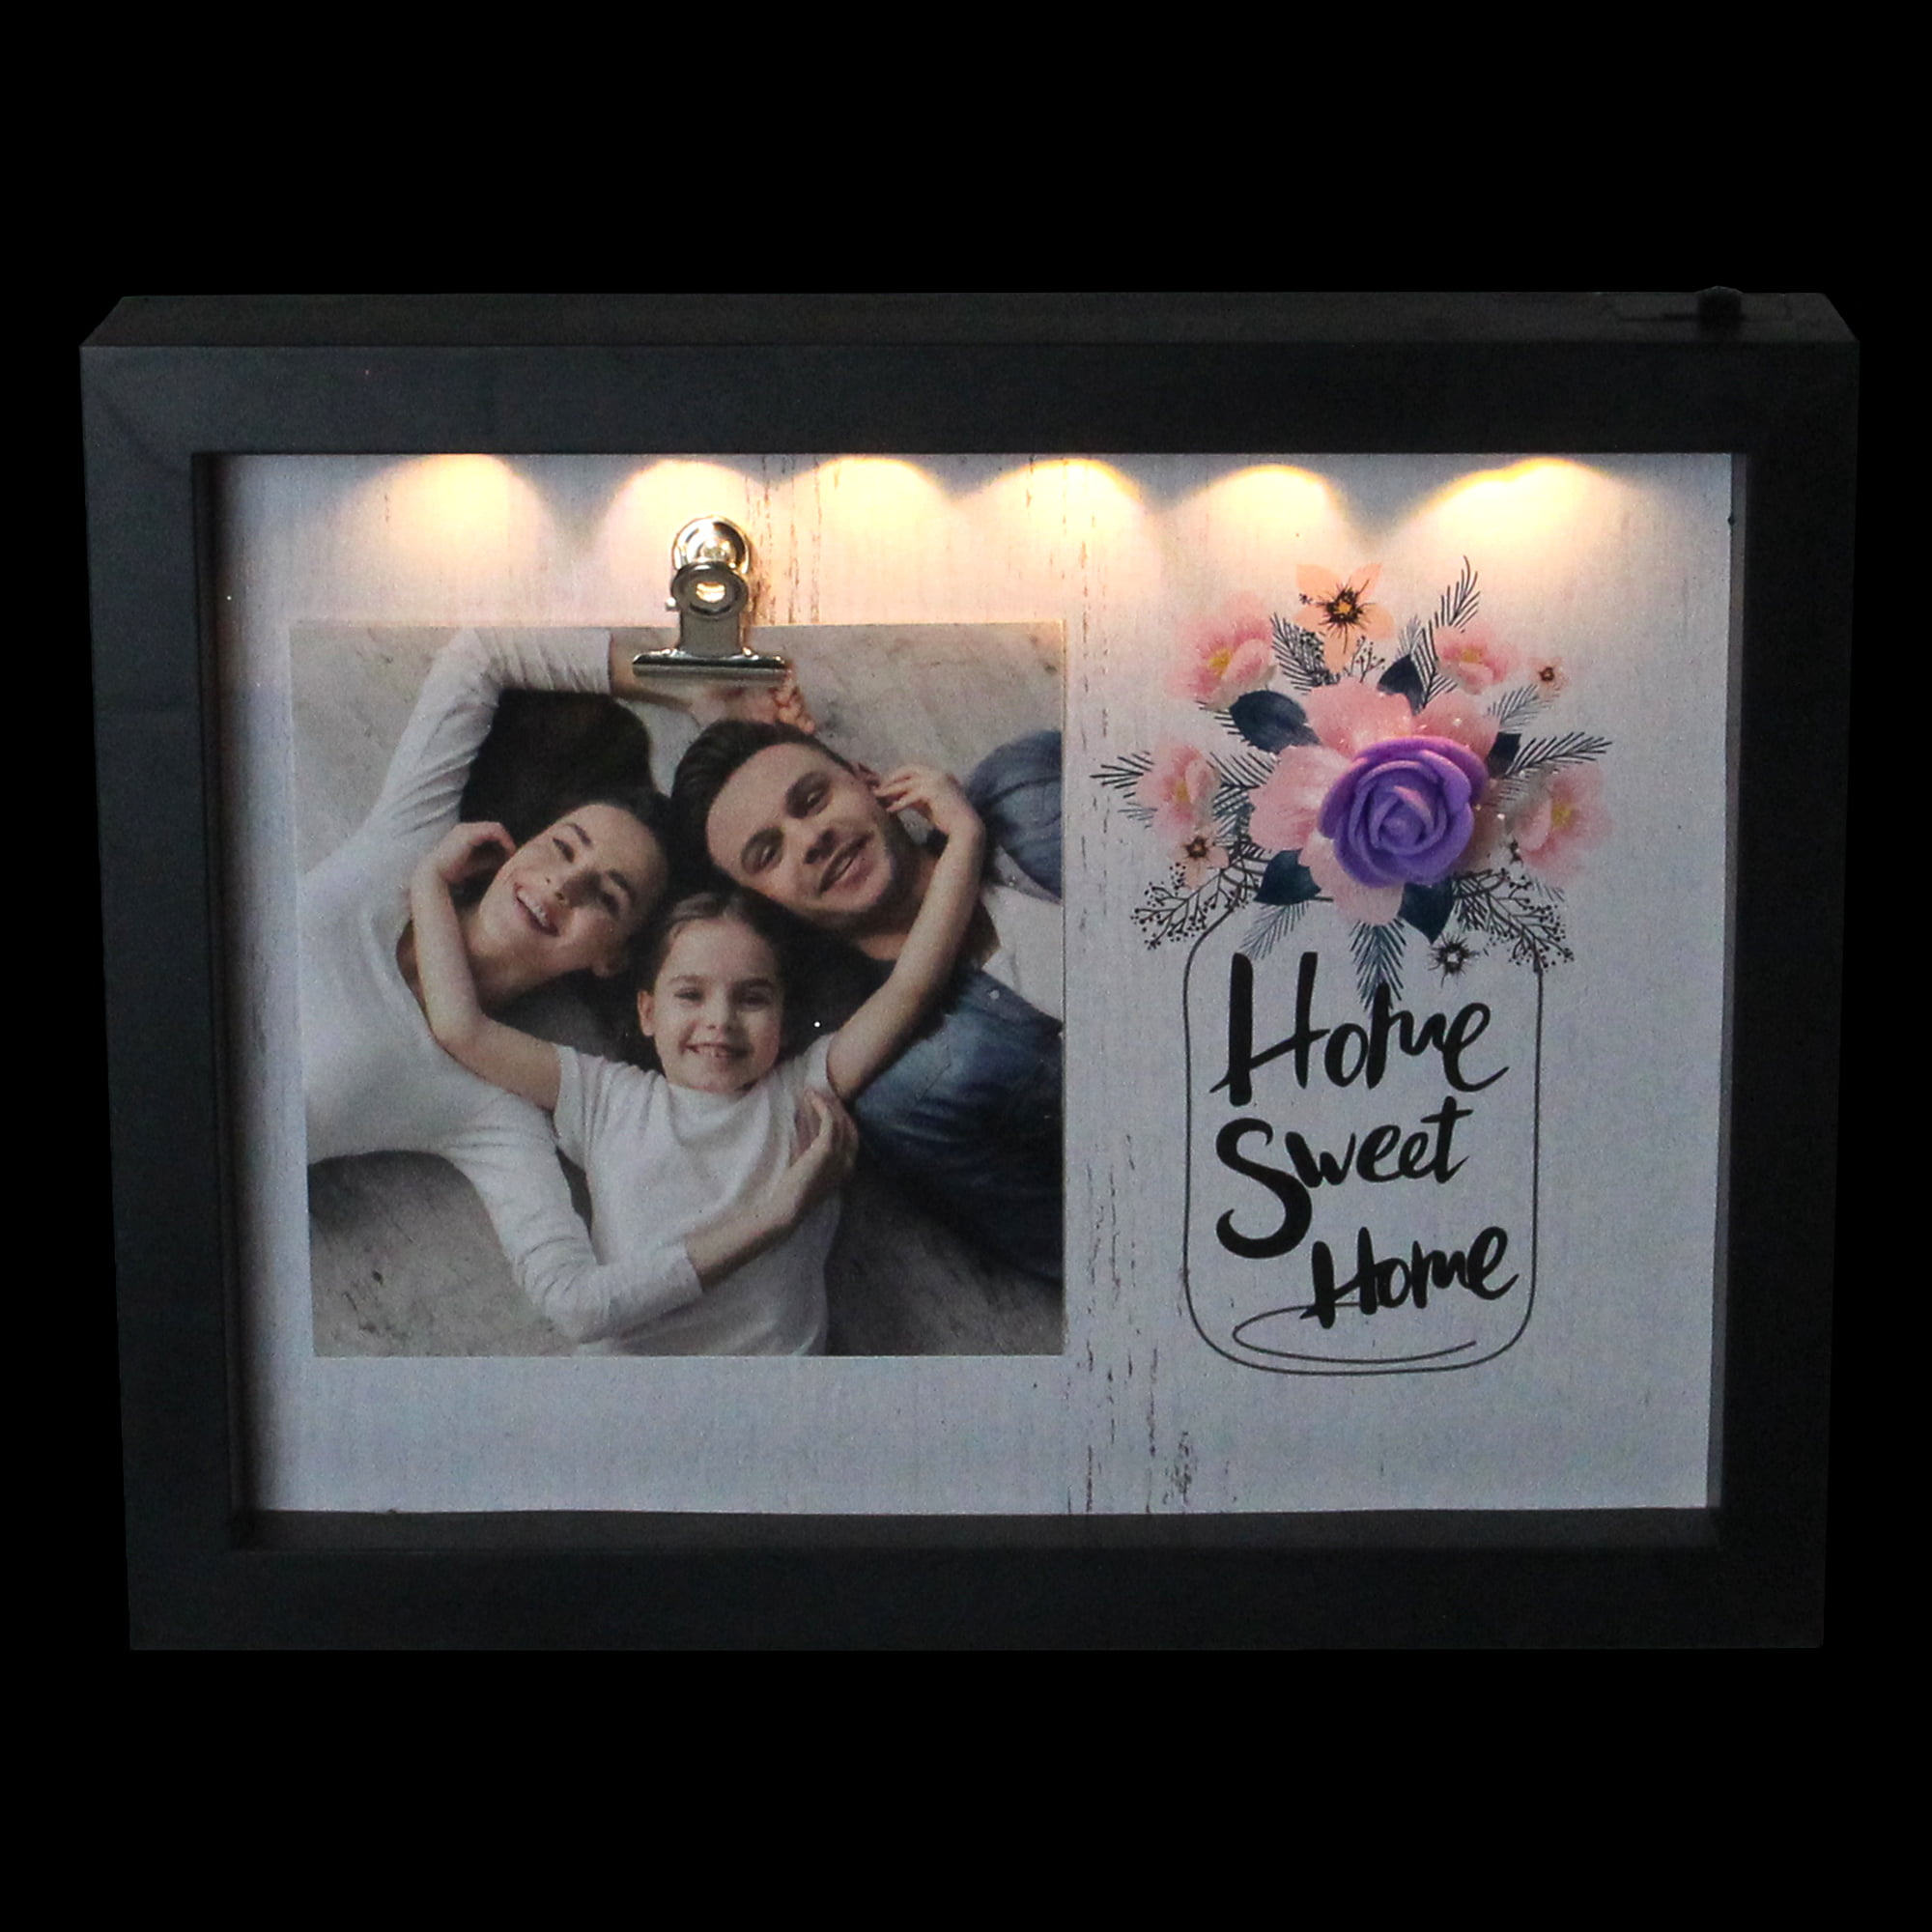 Home Sweet Home Sampler In Frame On White Background Stock Photo - Download  Image Now - iStock